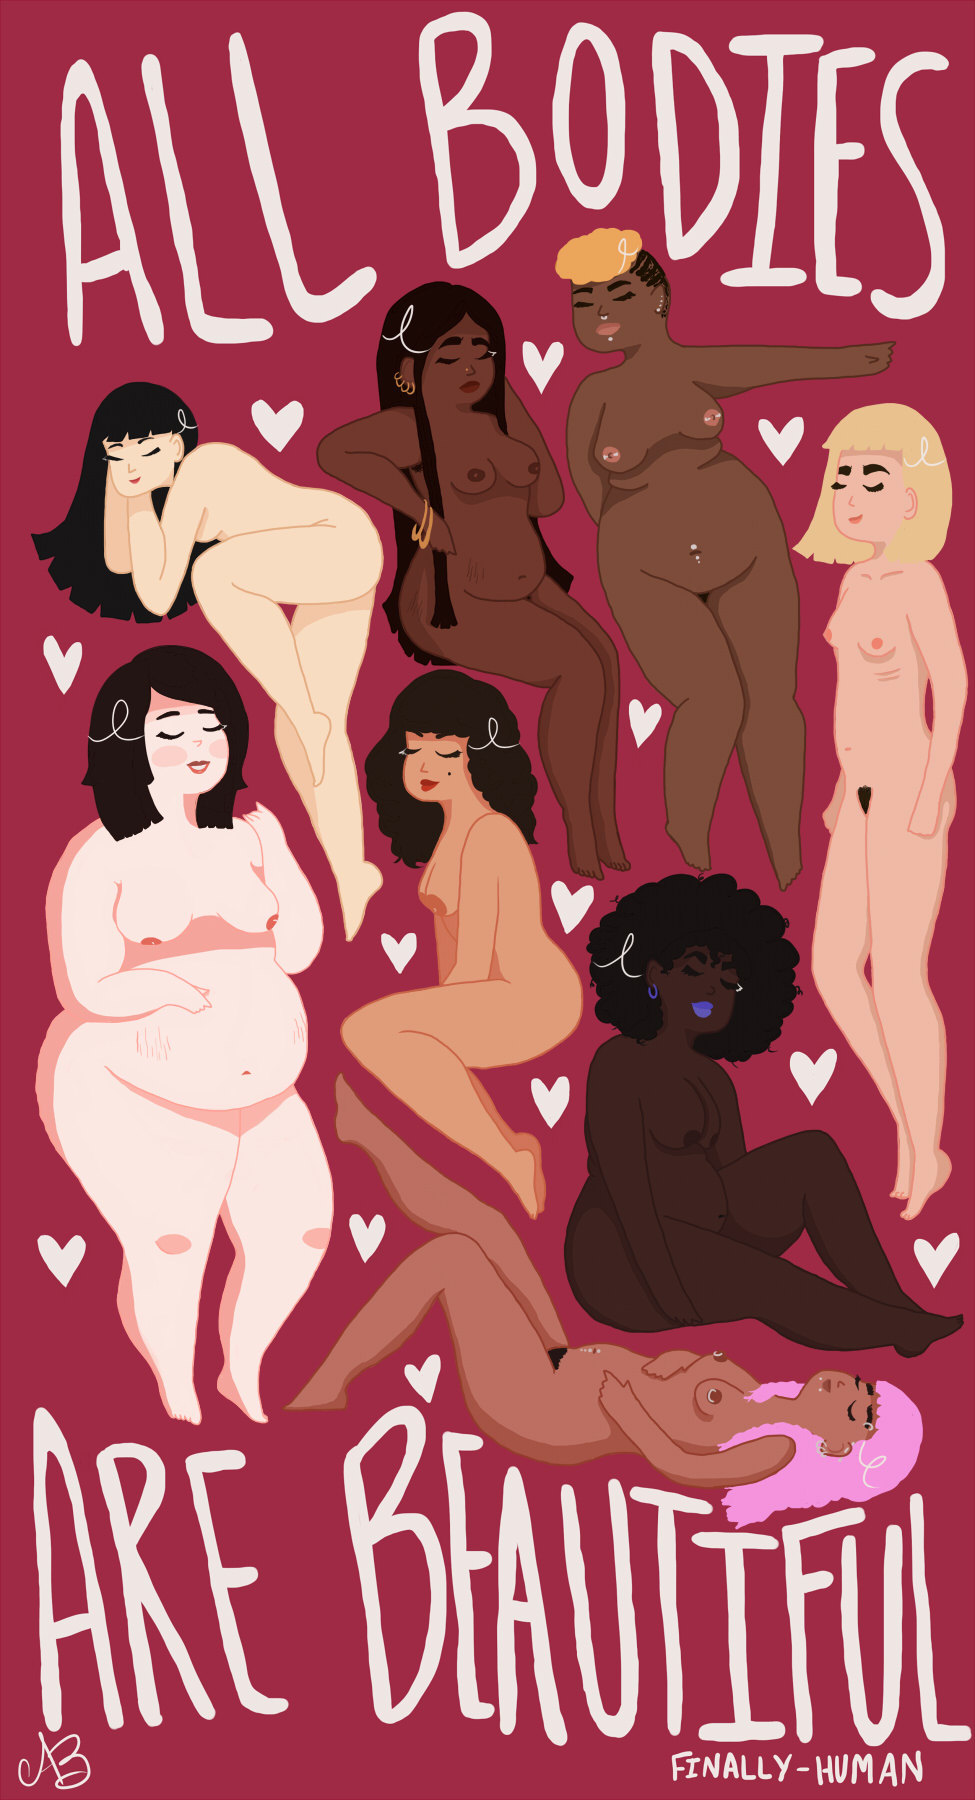 finally-human:

All Bodies Are Beautiful - Abbie Bevan
